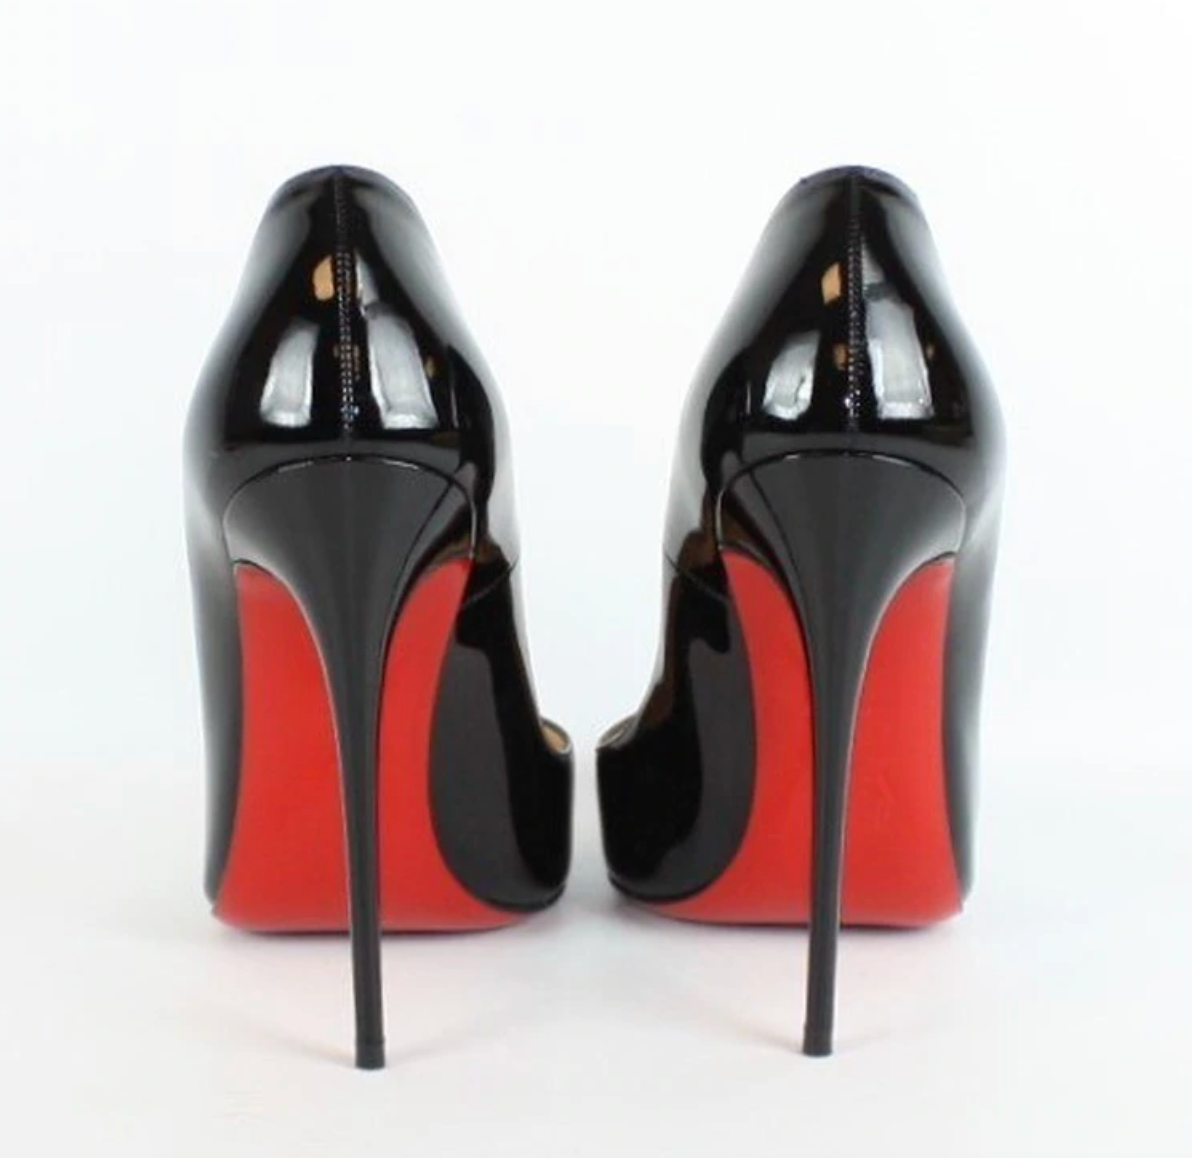 A Christian Louboutin Shoe Repair Review in New York City